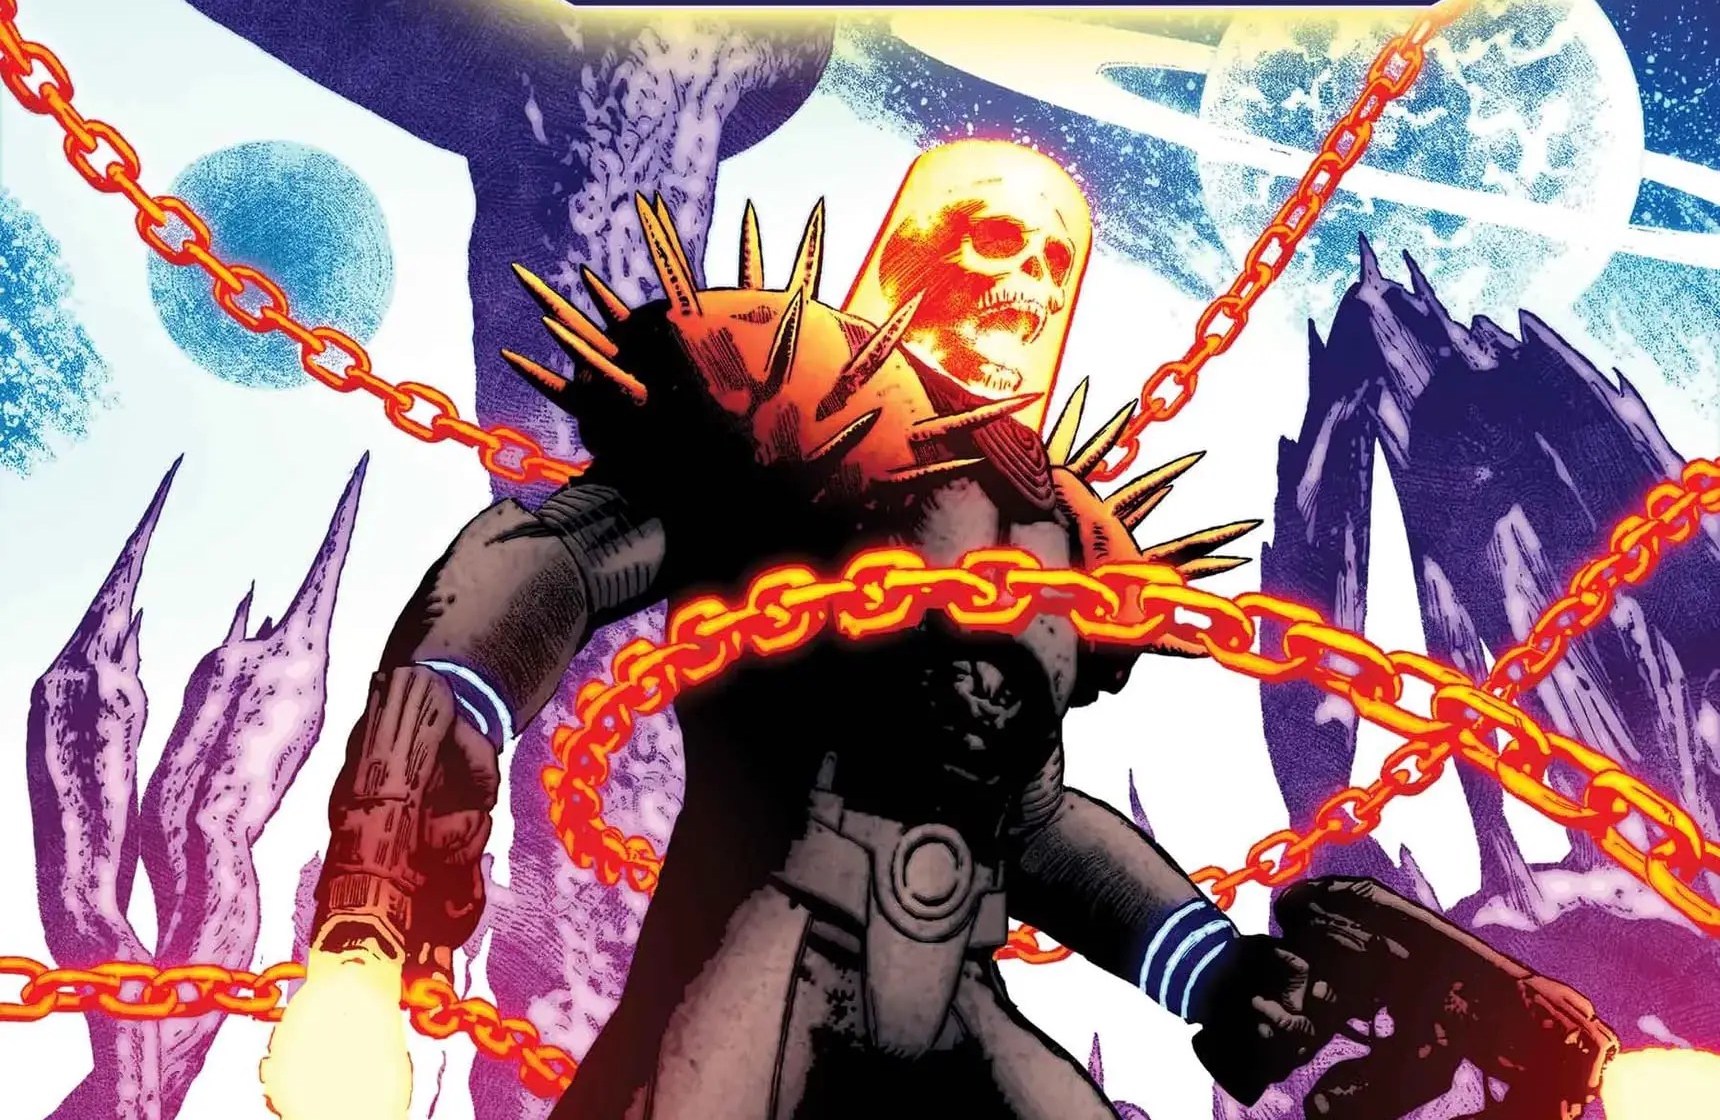 'Cosmic Ghost Rider' #1 brings a strong western vibe